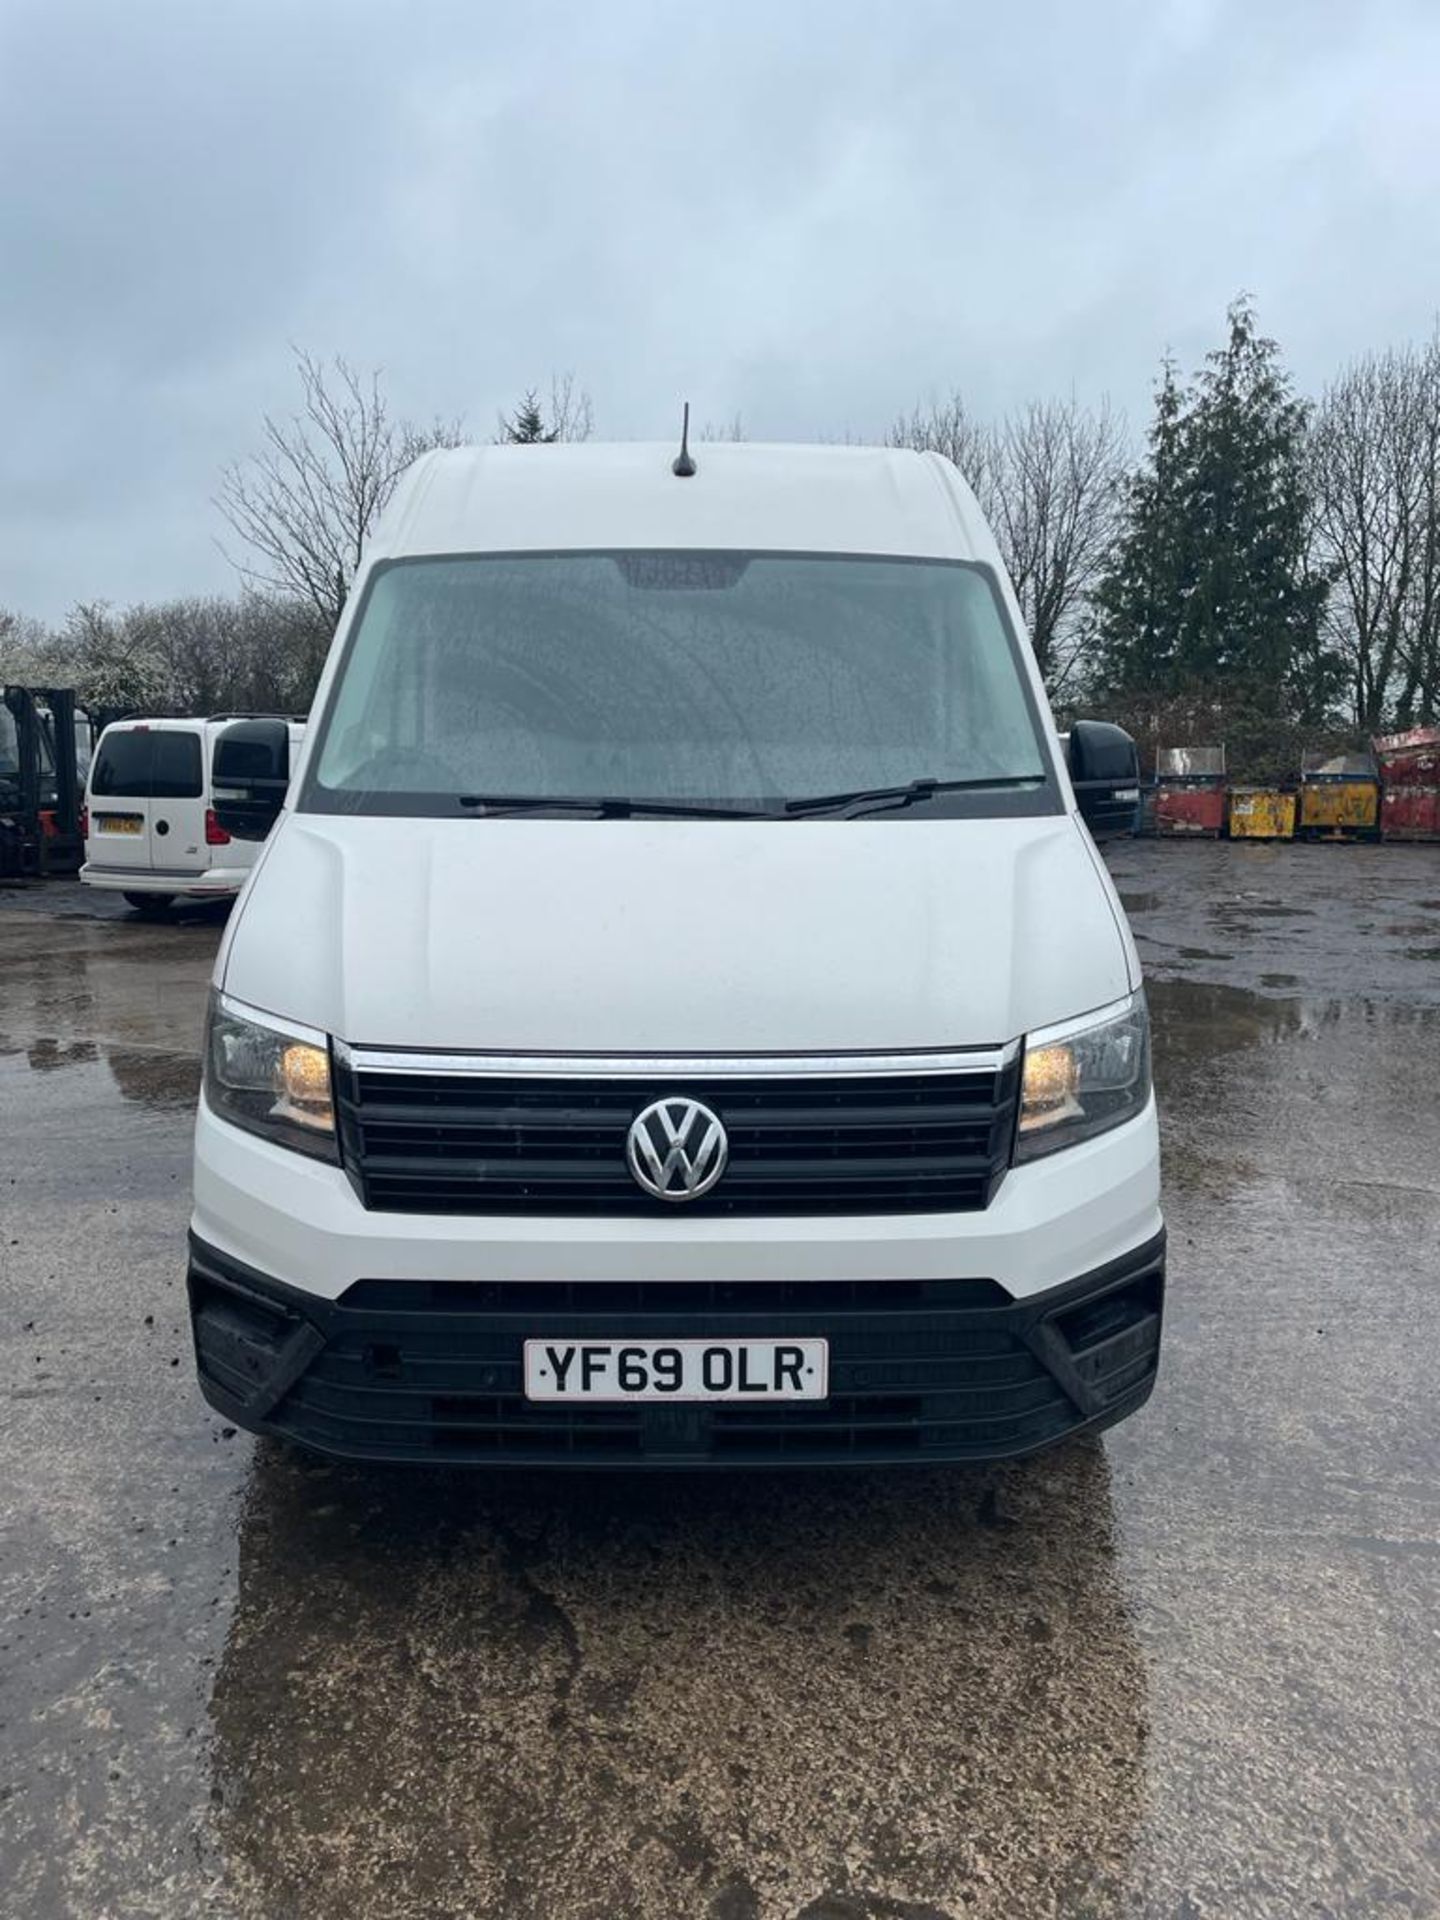 2019, Volkswagen Crafter CR35 TDI Blue Motion - Euro 6 ULEZ Compliant - Image 3 of 8